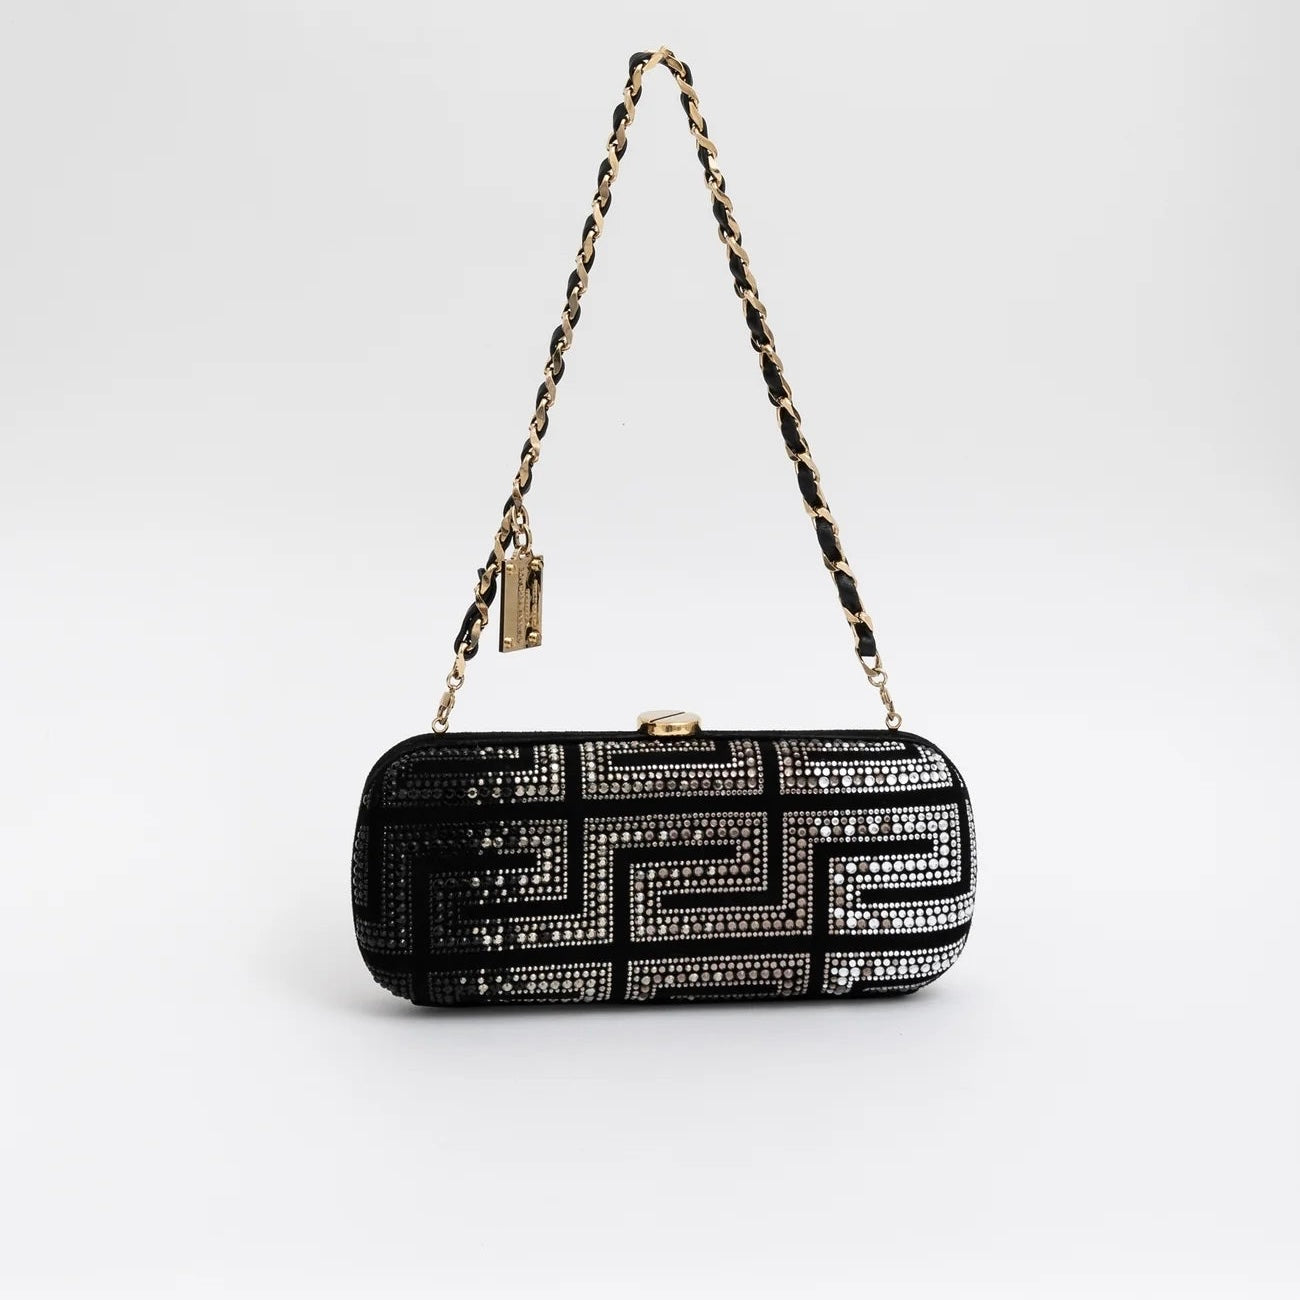 Gianni Versace Couture Velvet and Crystal Bag (removable strap)